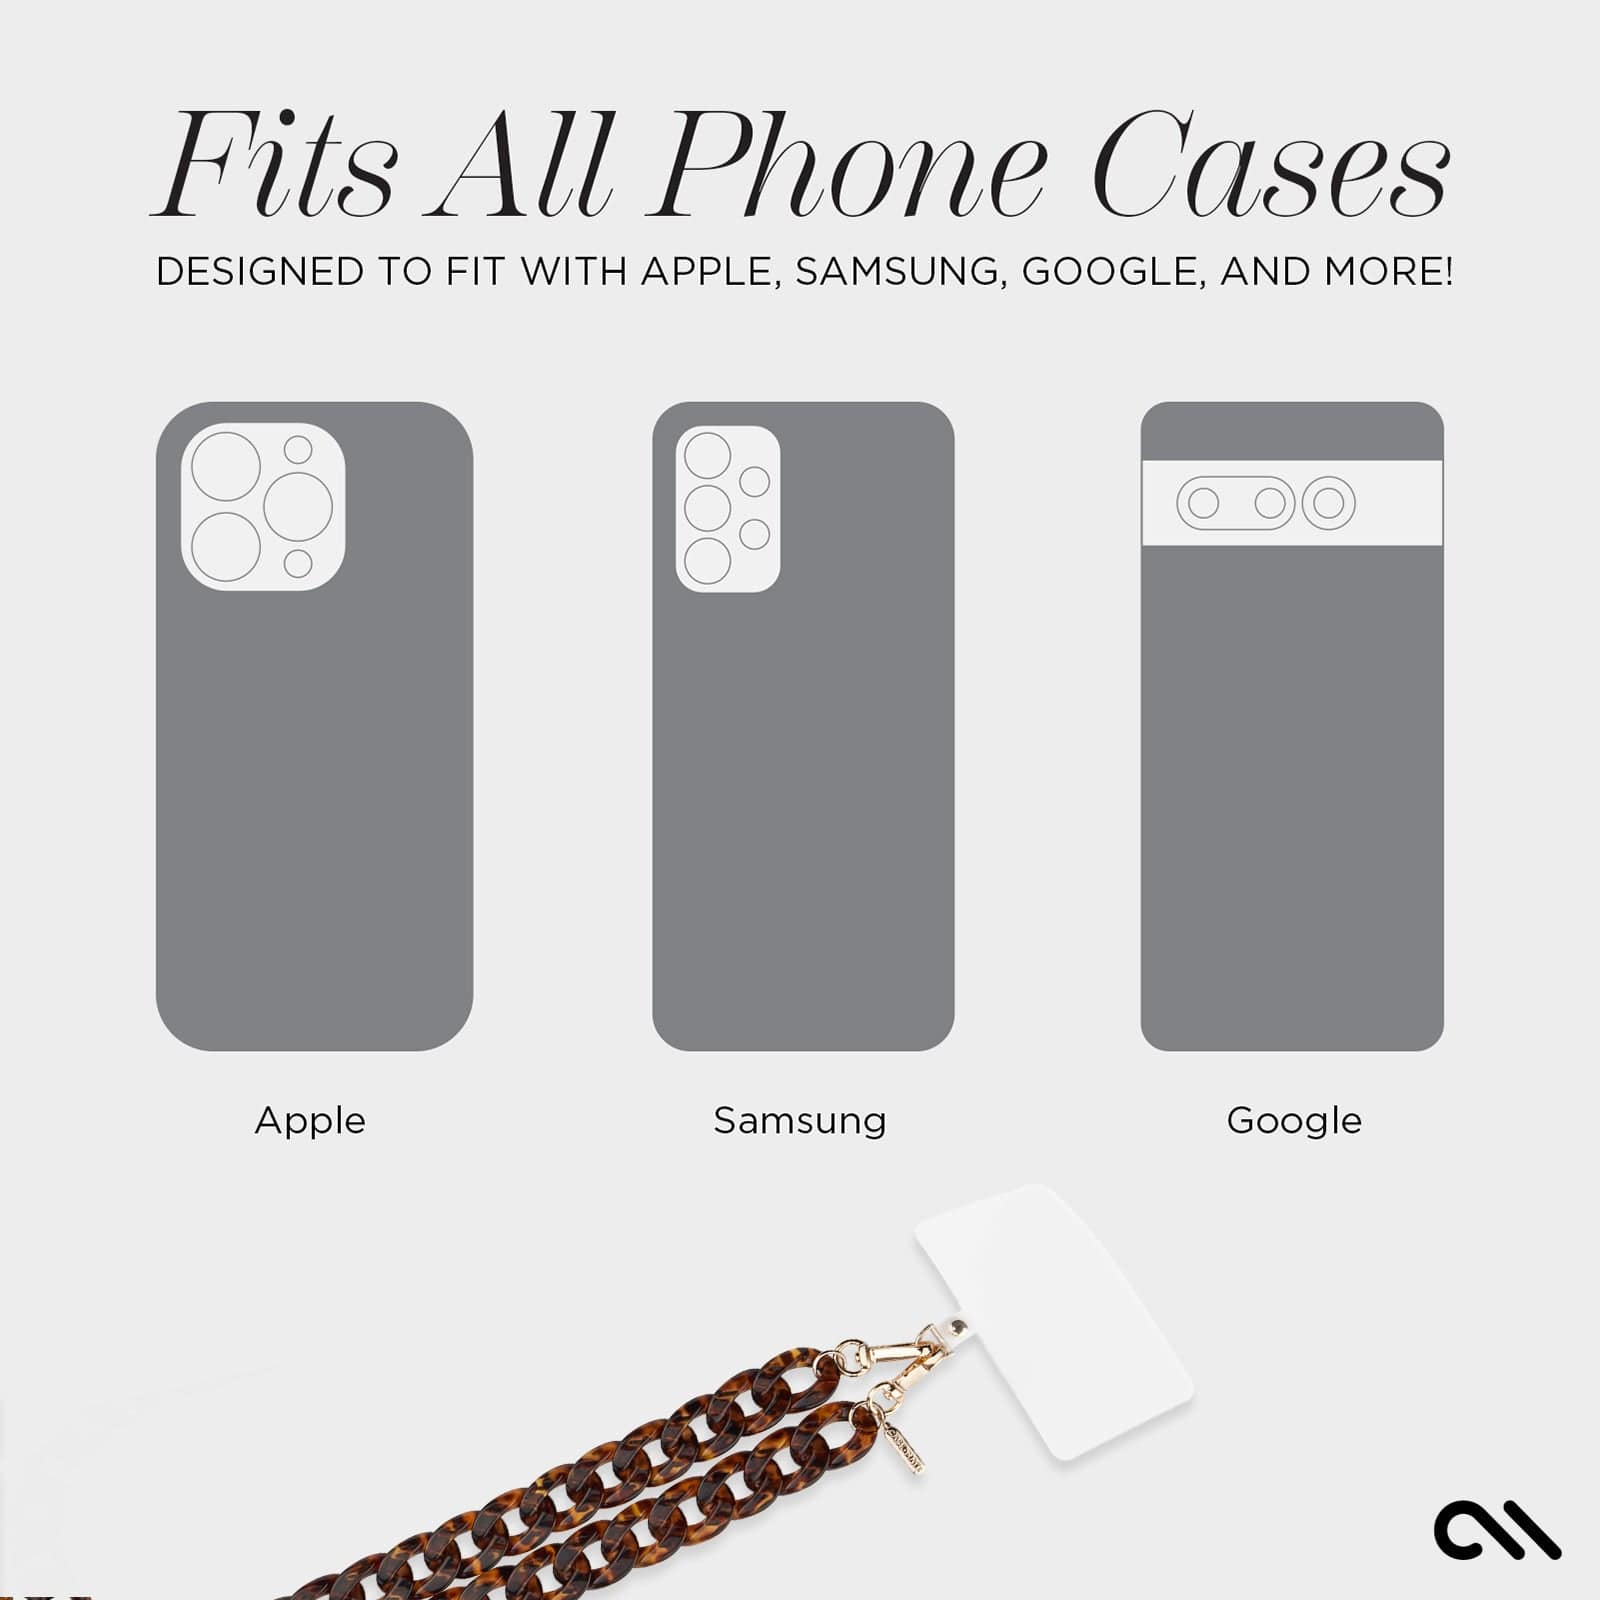 FITS ALL PHONE CASES. DESIGNED TO FIT WITH APPLE, SAMSUNG, GOOGLE AND MORE!